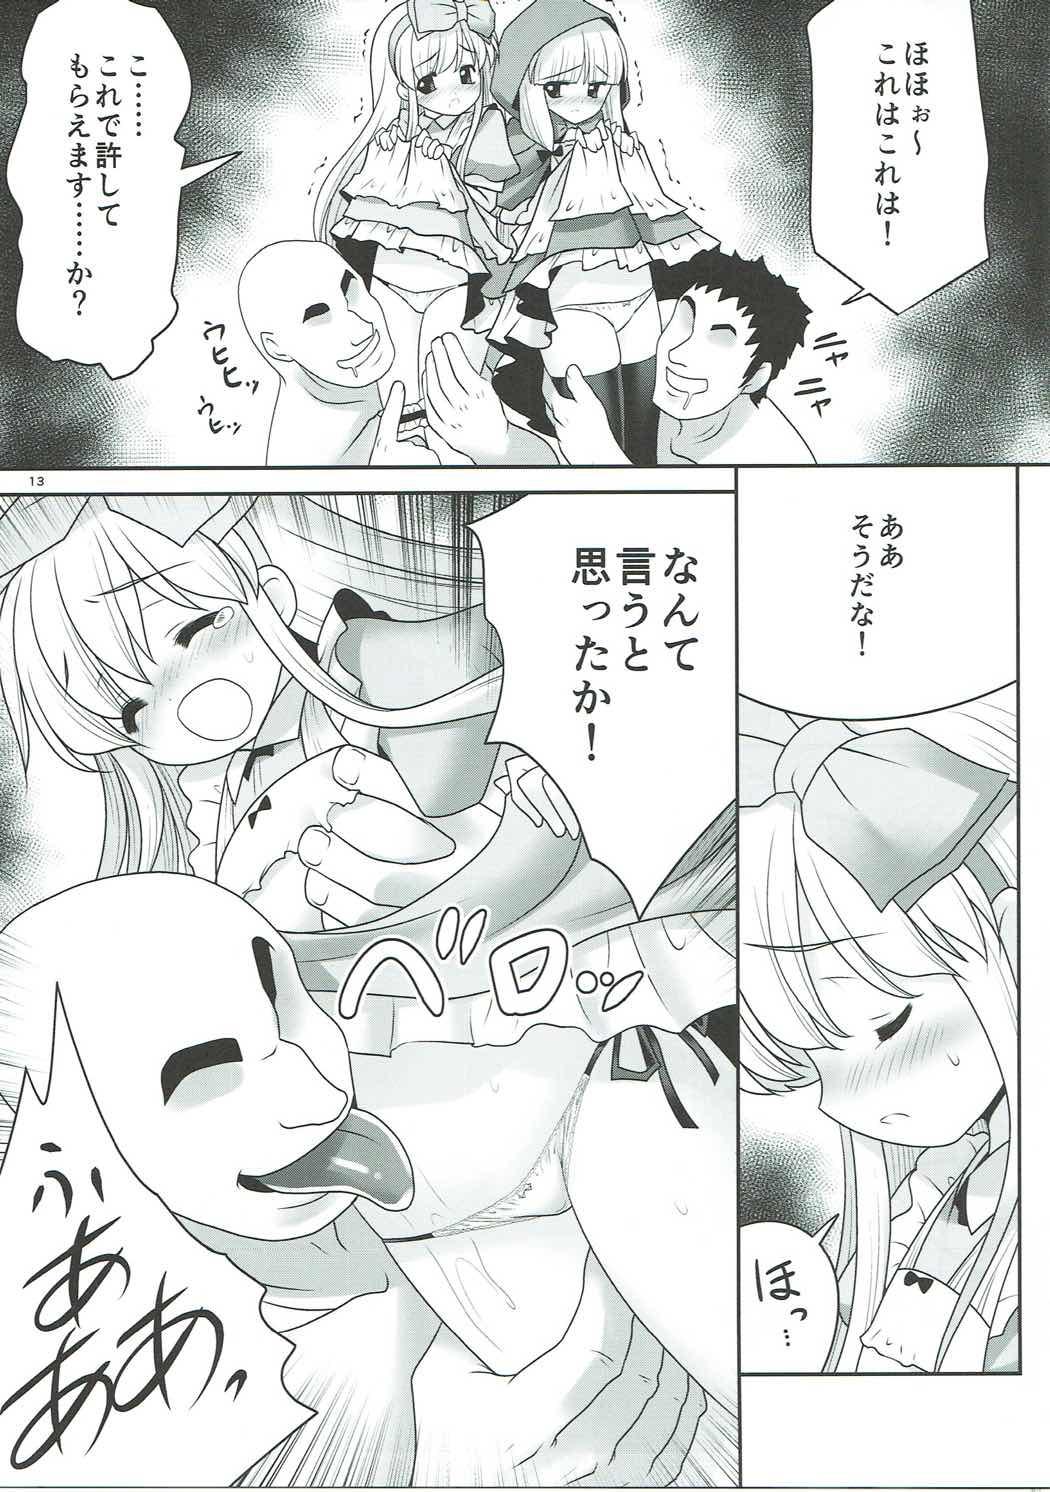 She Osoware Nureru Ehon no Shoujo - Little red riding hood Alice in the country of hearts Latex - Page 12